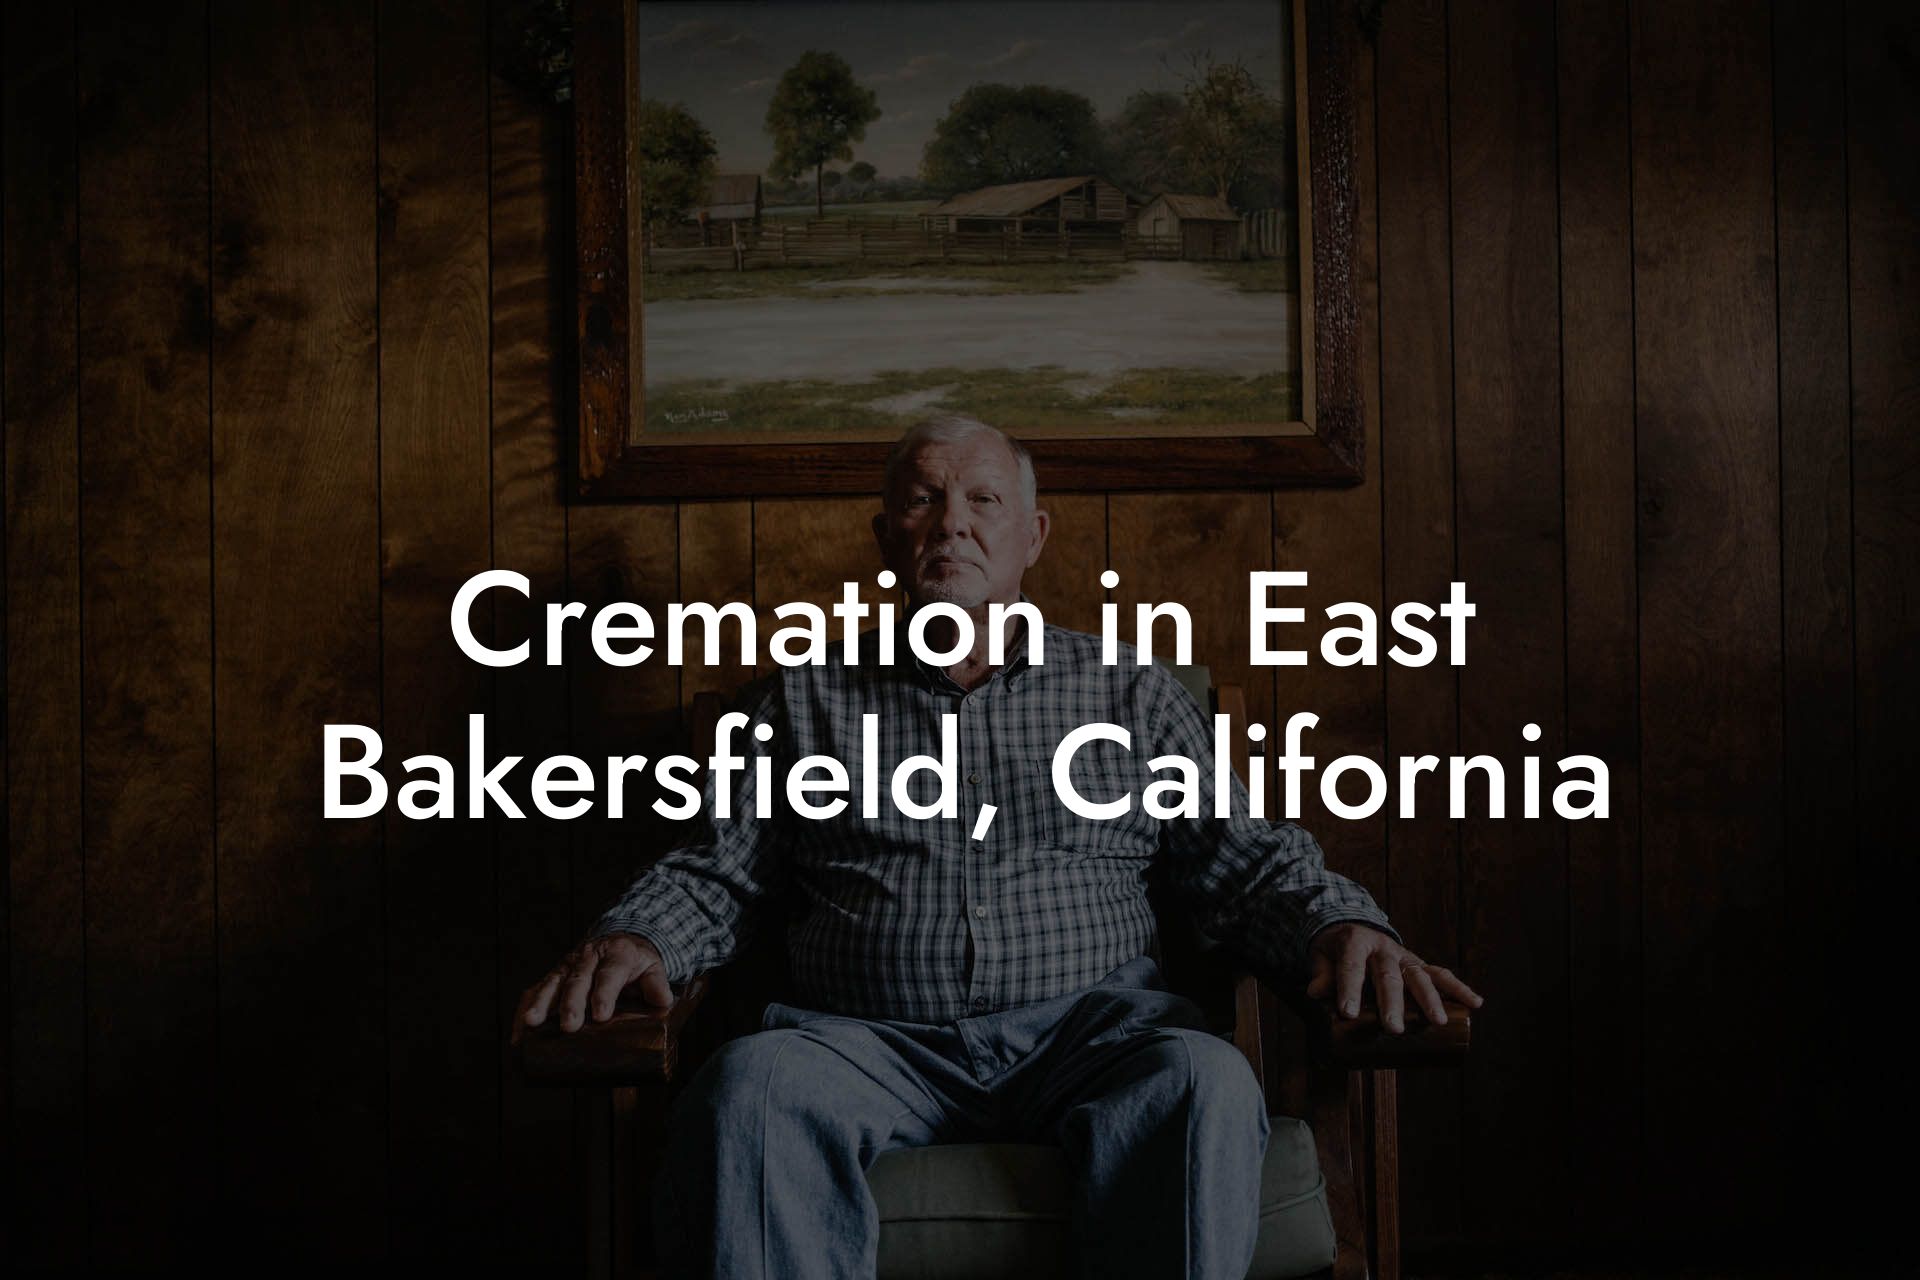 Cremation in East Bakersfield, California